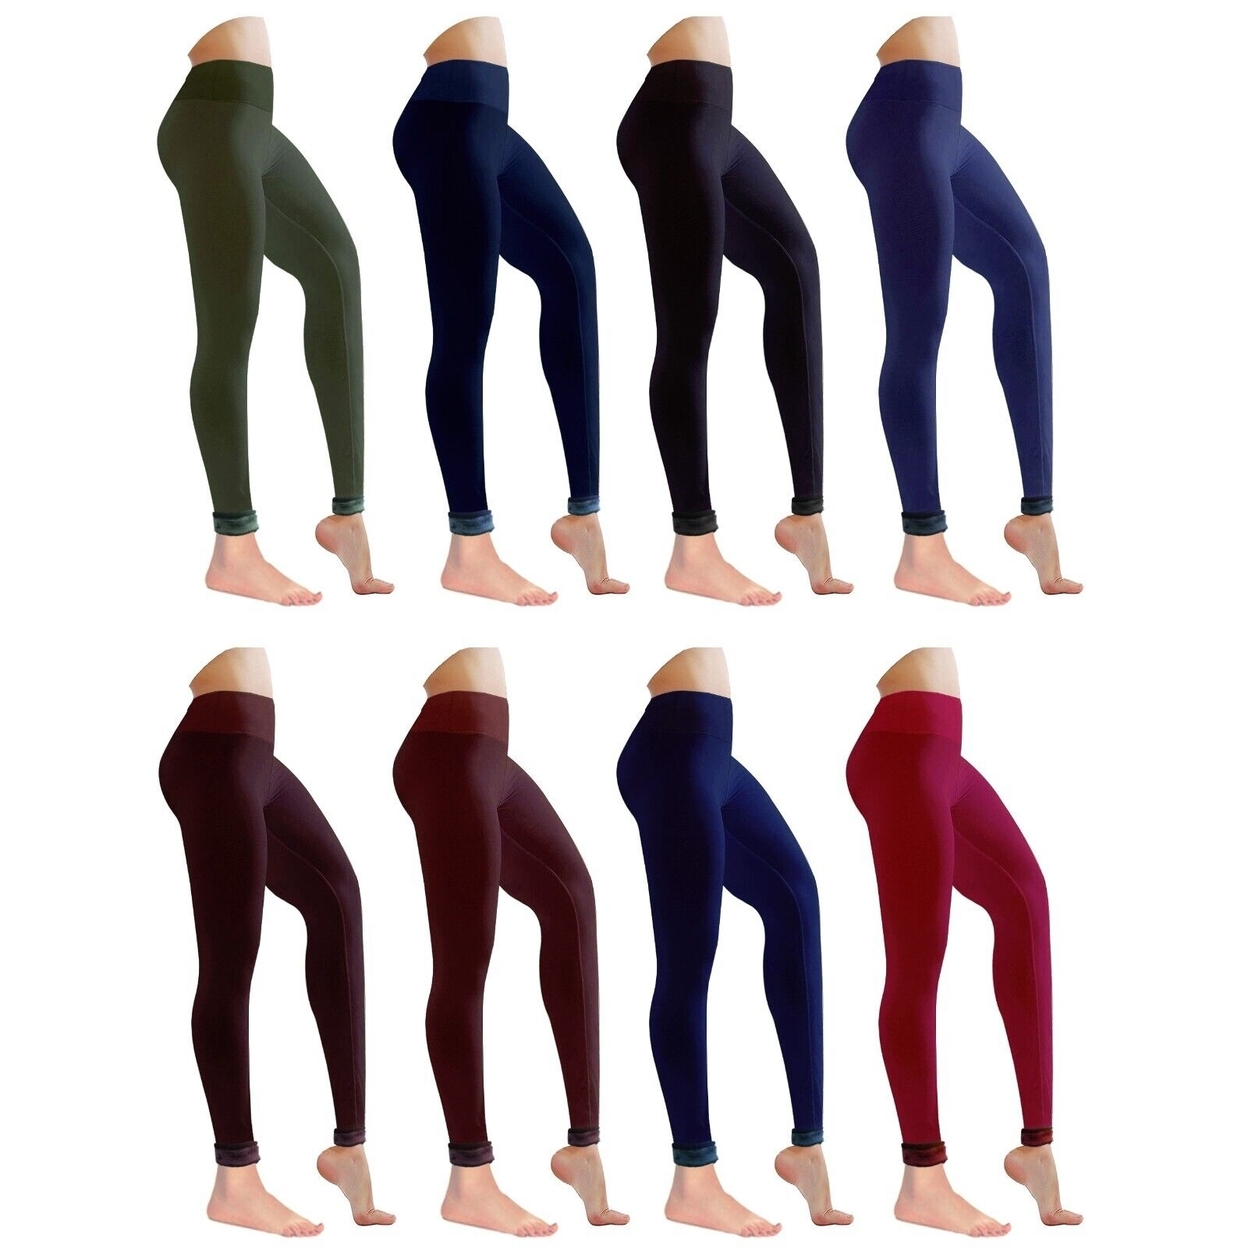 4-Pack: Women's Winter Warm Ultra Soft Cozy Fur Lined Leggings - Assorted, X-large